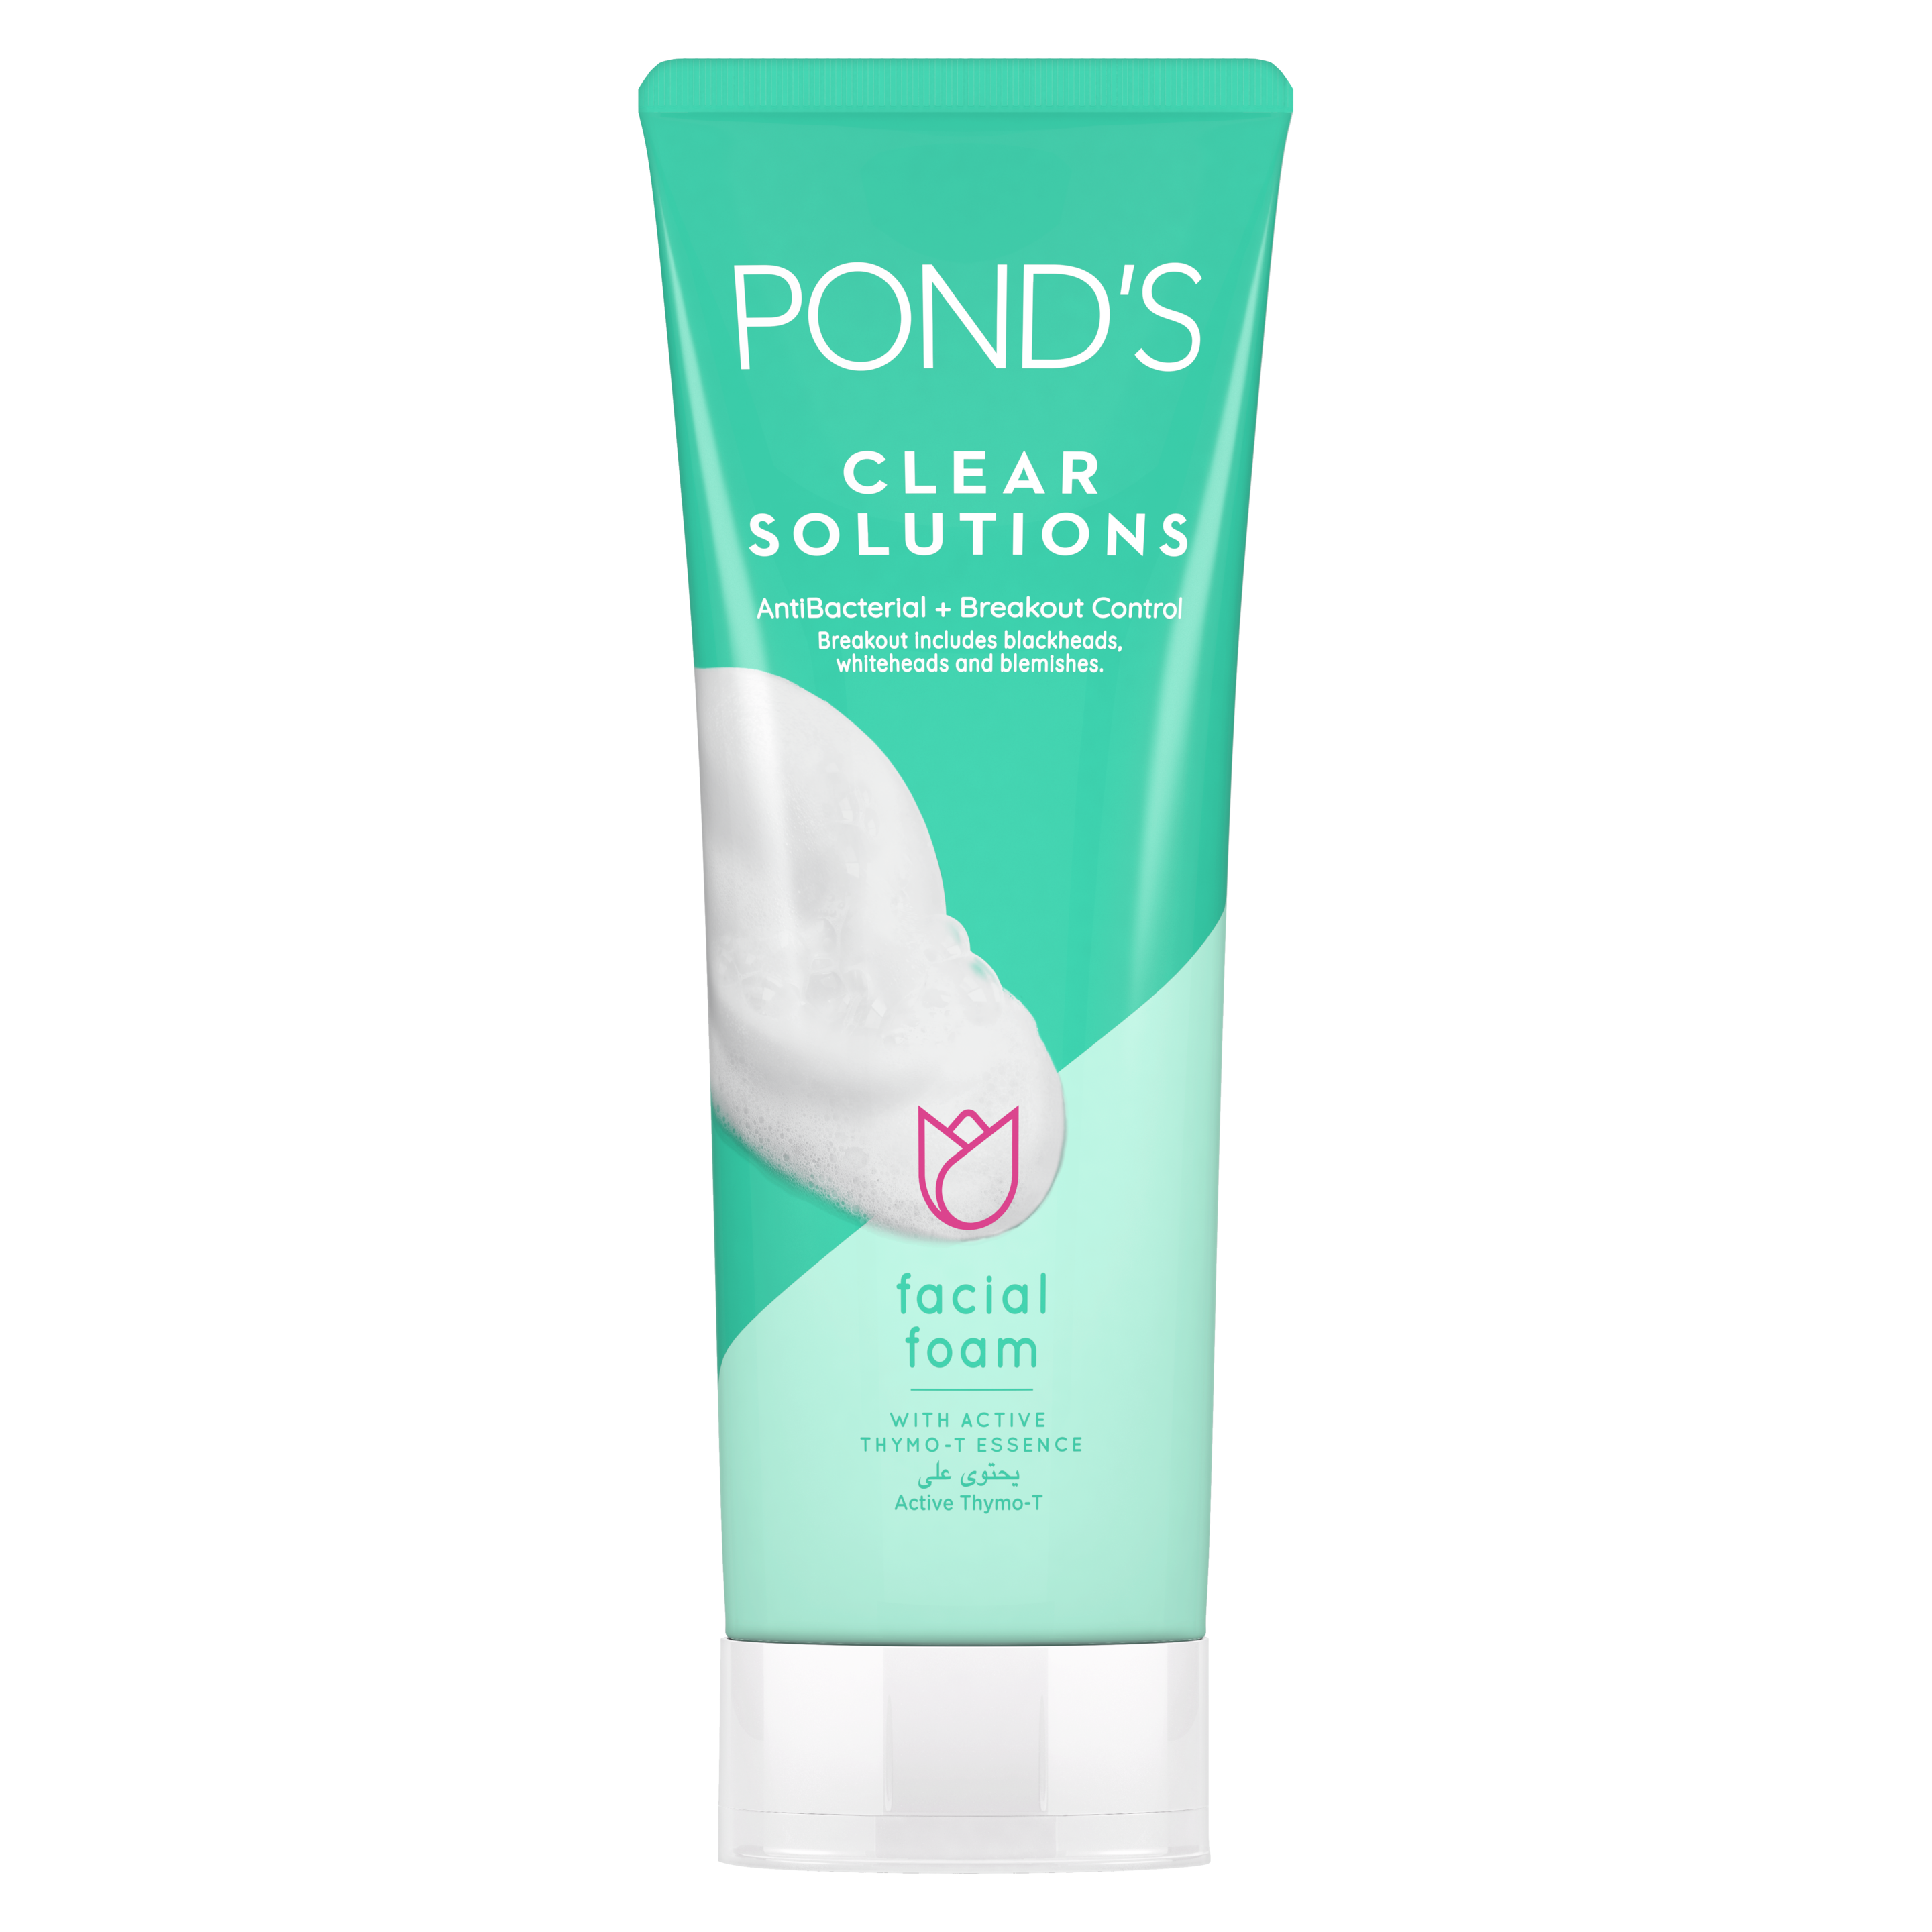 Pond's Clear Solutions Facial Foam